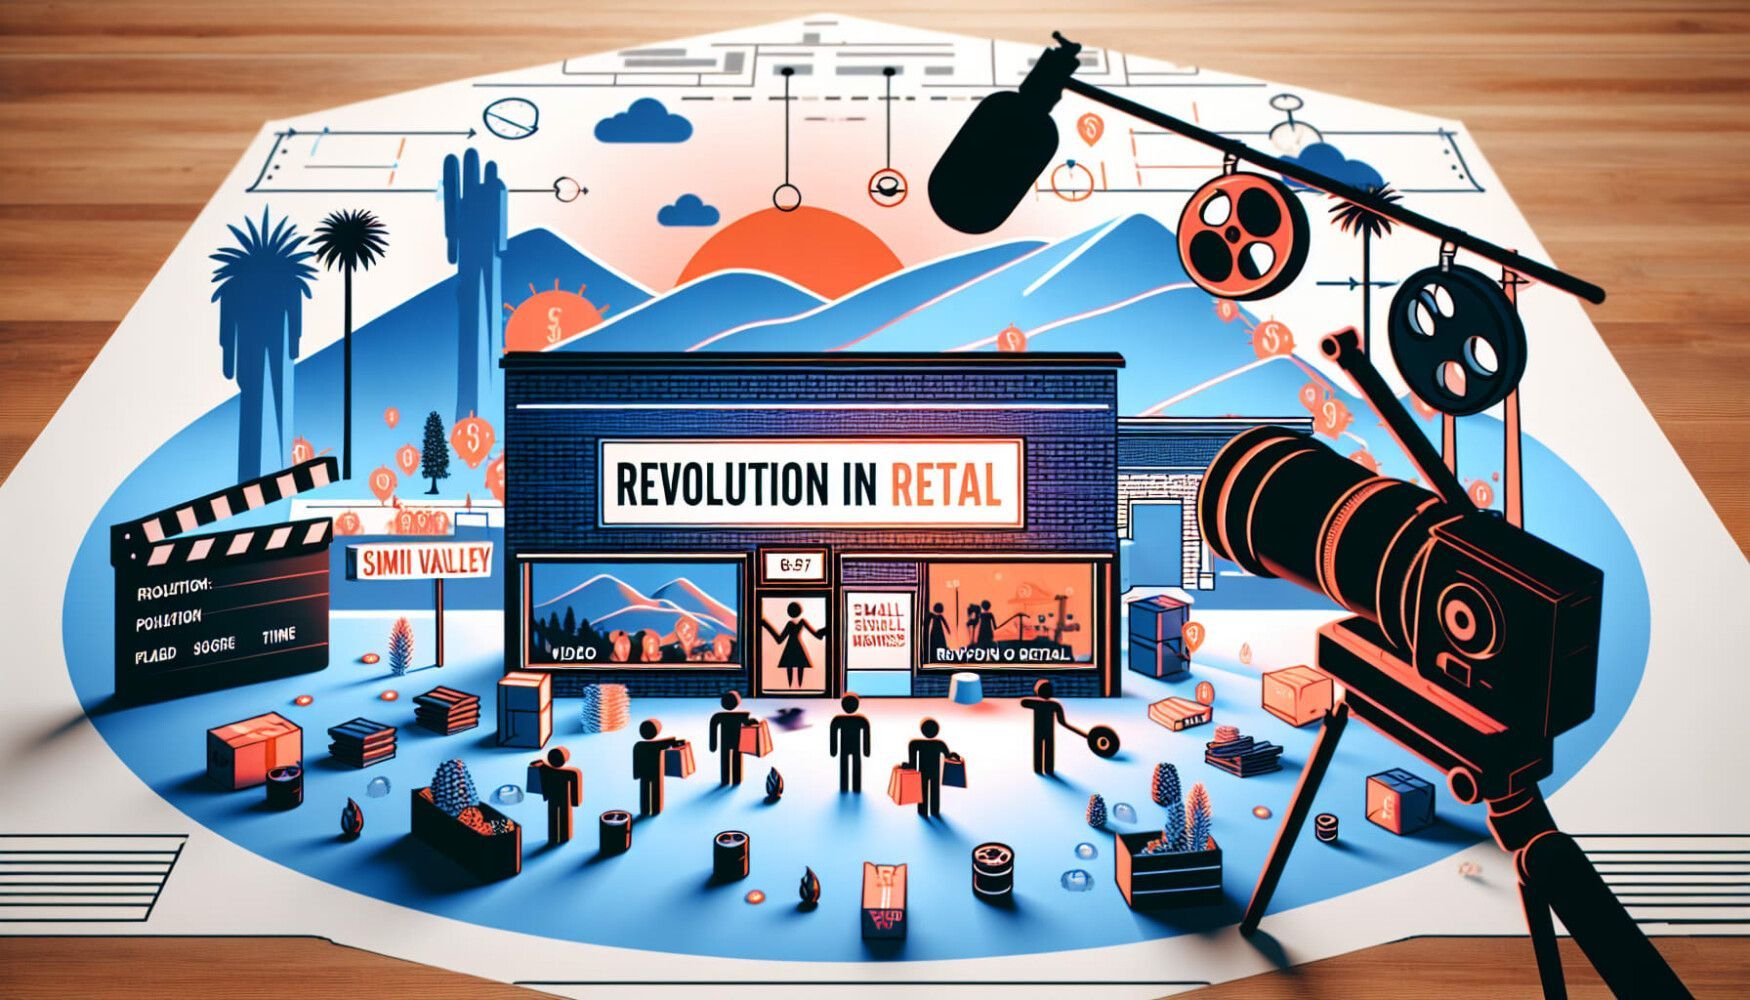 Explore how video marketing strategies are transforming Simi Valley's small retail businesses. Boost your business with revolutionary tips!